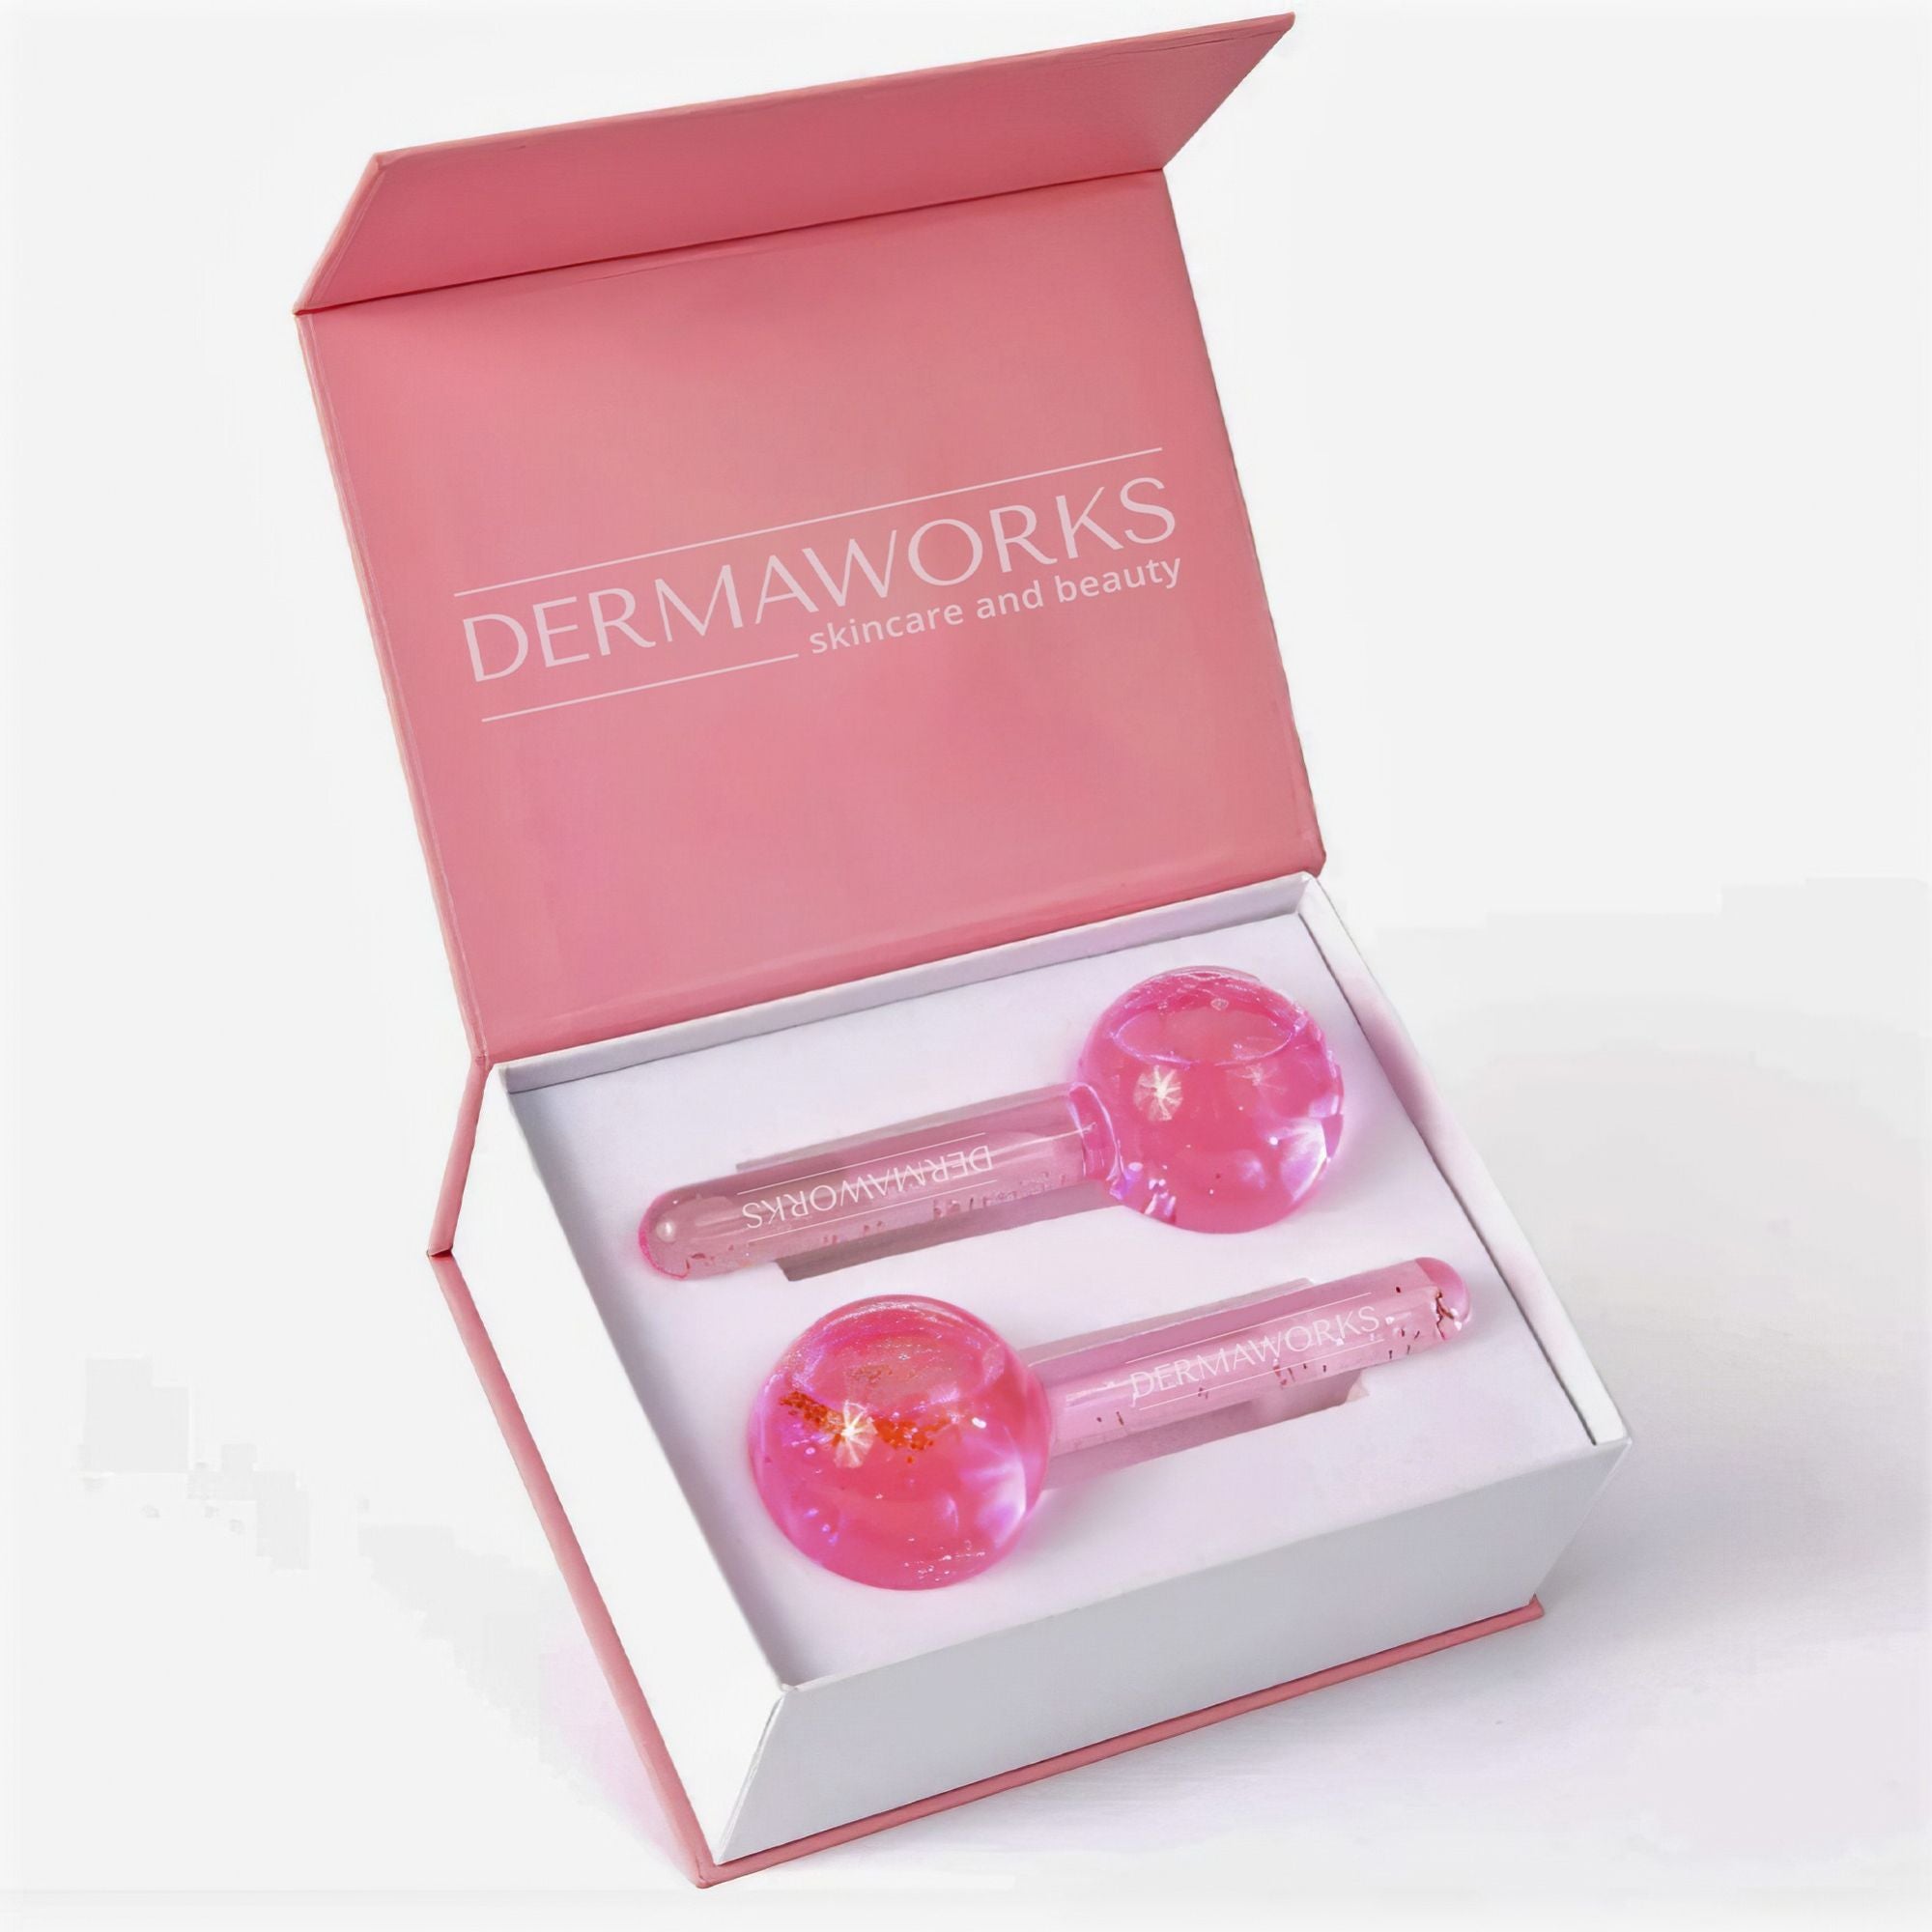 Dermaworks set of pink ice globes for face in presentation box; the ideal birthday gift for her, Mother’s Day gift, Christmas gift or gift for mum. 